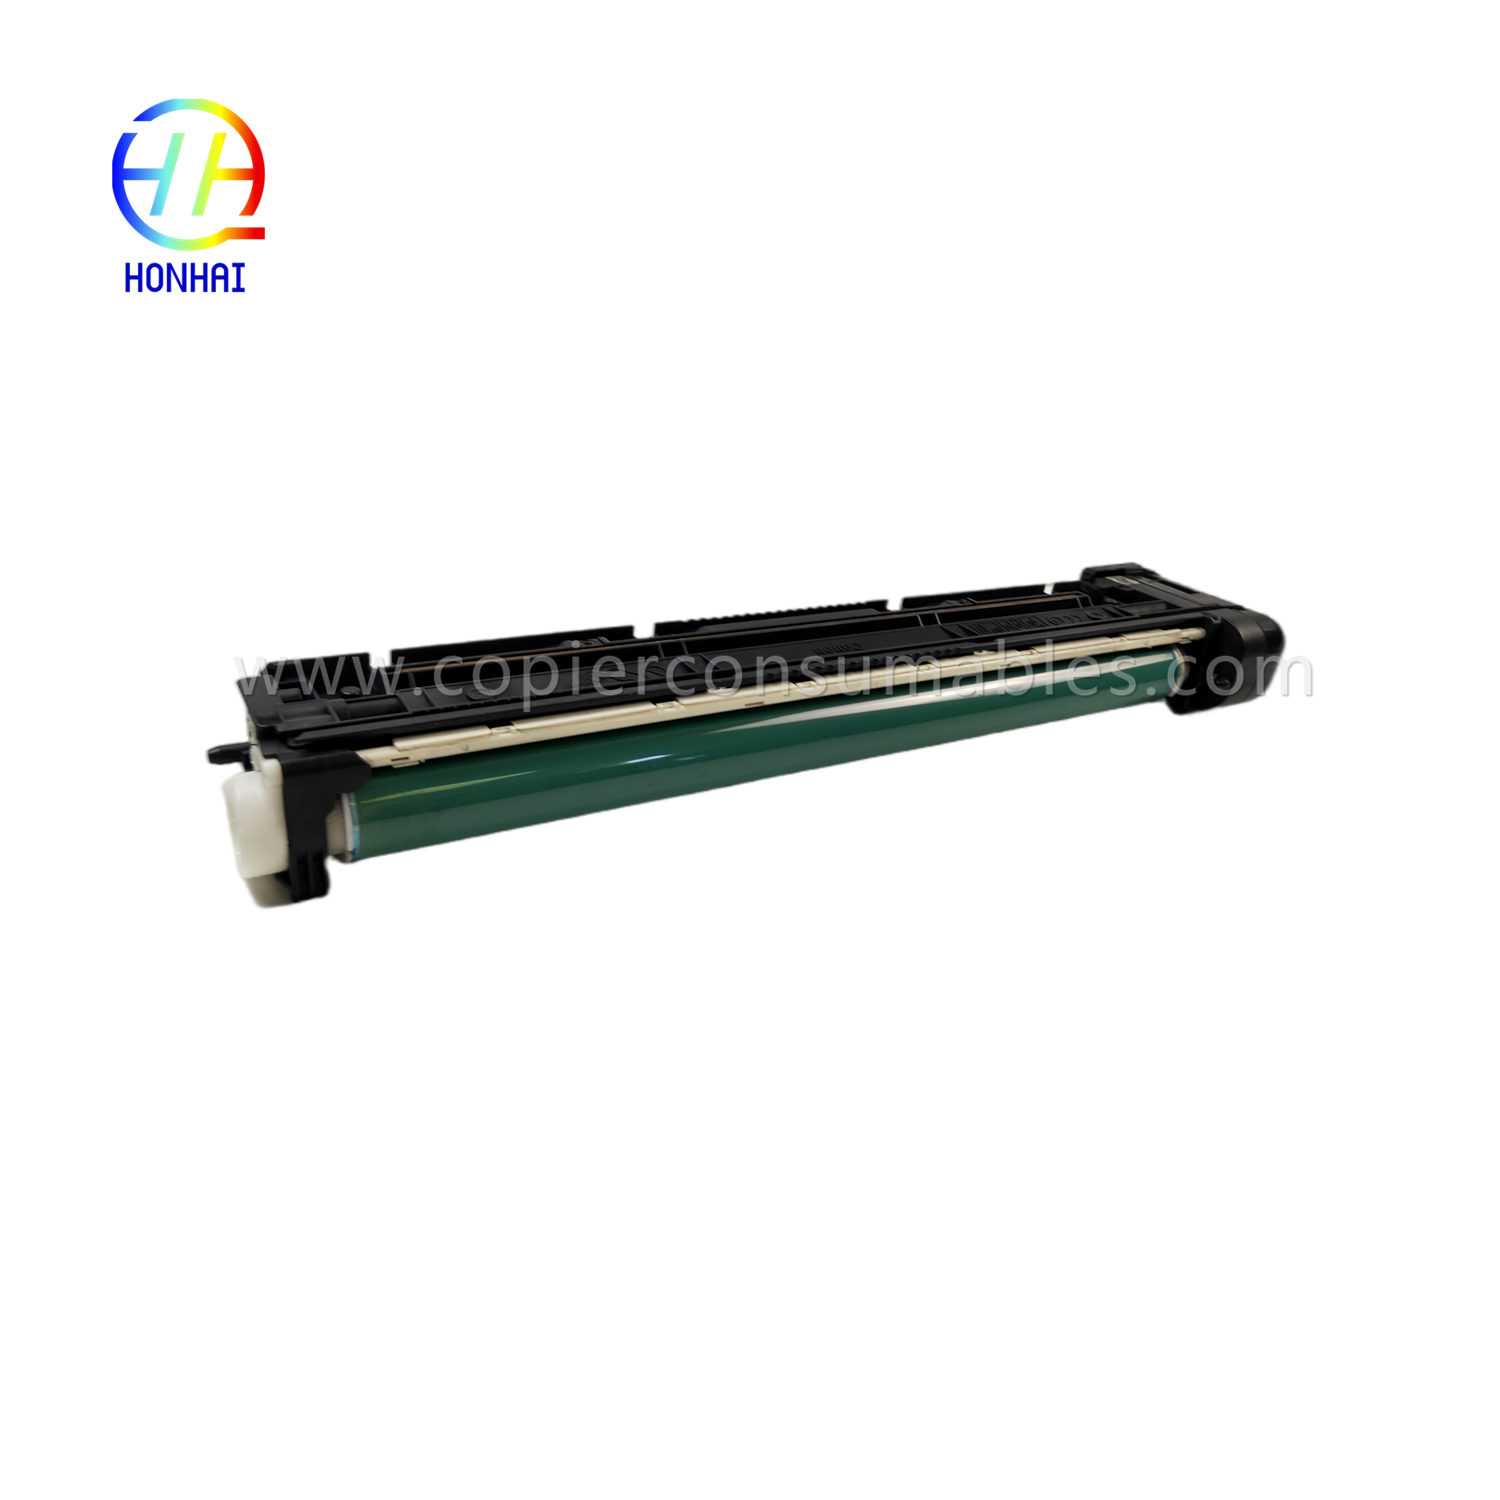 https://c585.goodao.net/drum-unit-with-asalka-new-opc-drum-for-canon-ir-c3320-c3325-c3330-c3325i-c3330i-c3320i-image-drum-unit-product/